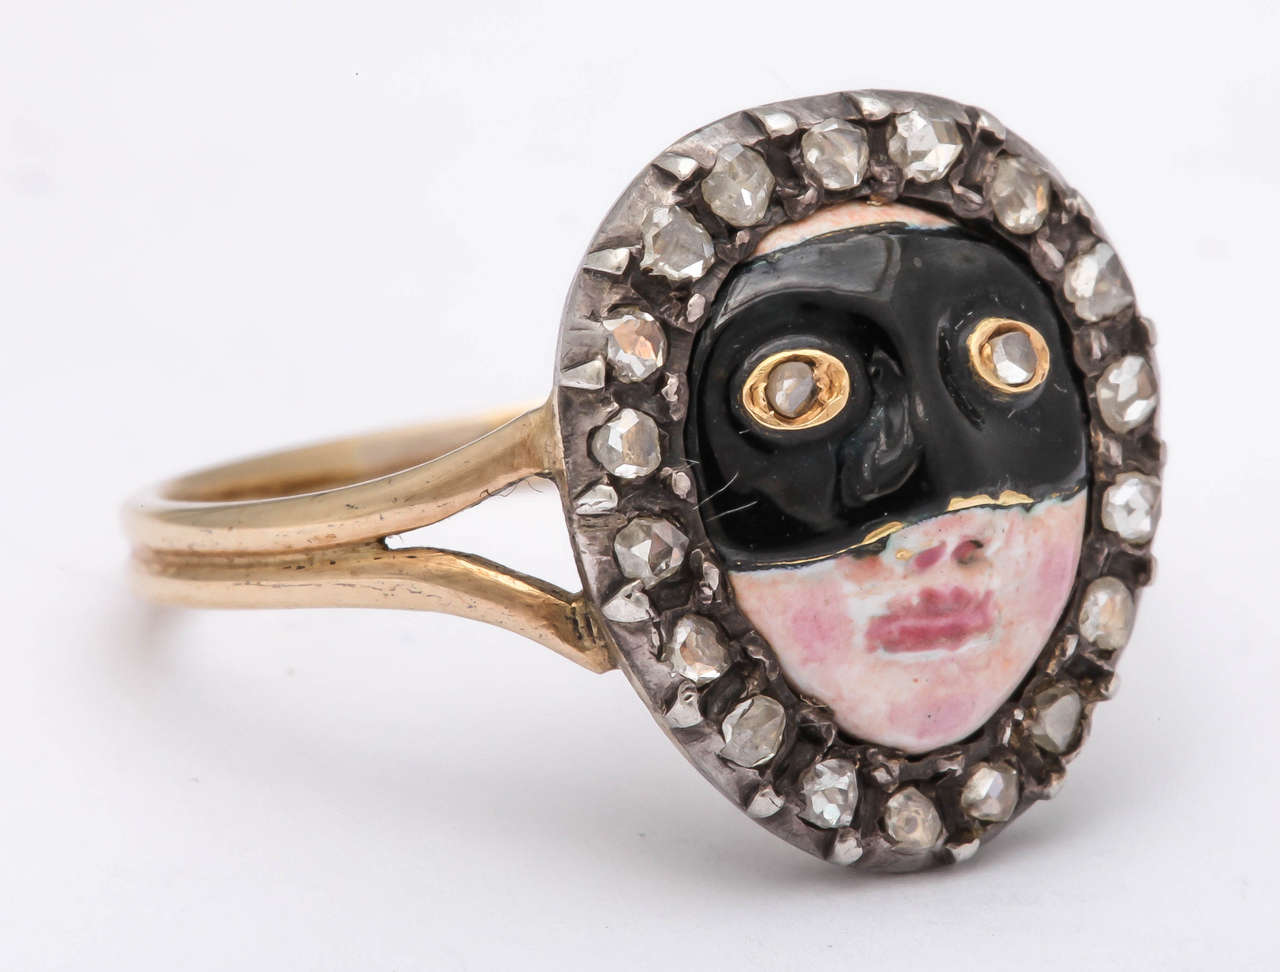 A lady’s face in enamel, with rosy cheeks and painted lips, wearing a black domino with rose diamond eyes, the border set with rose diamonds mounted in silver and gold. The reverse is designed as a gold shell.

Size 7 1/4.

France, 18th